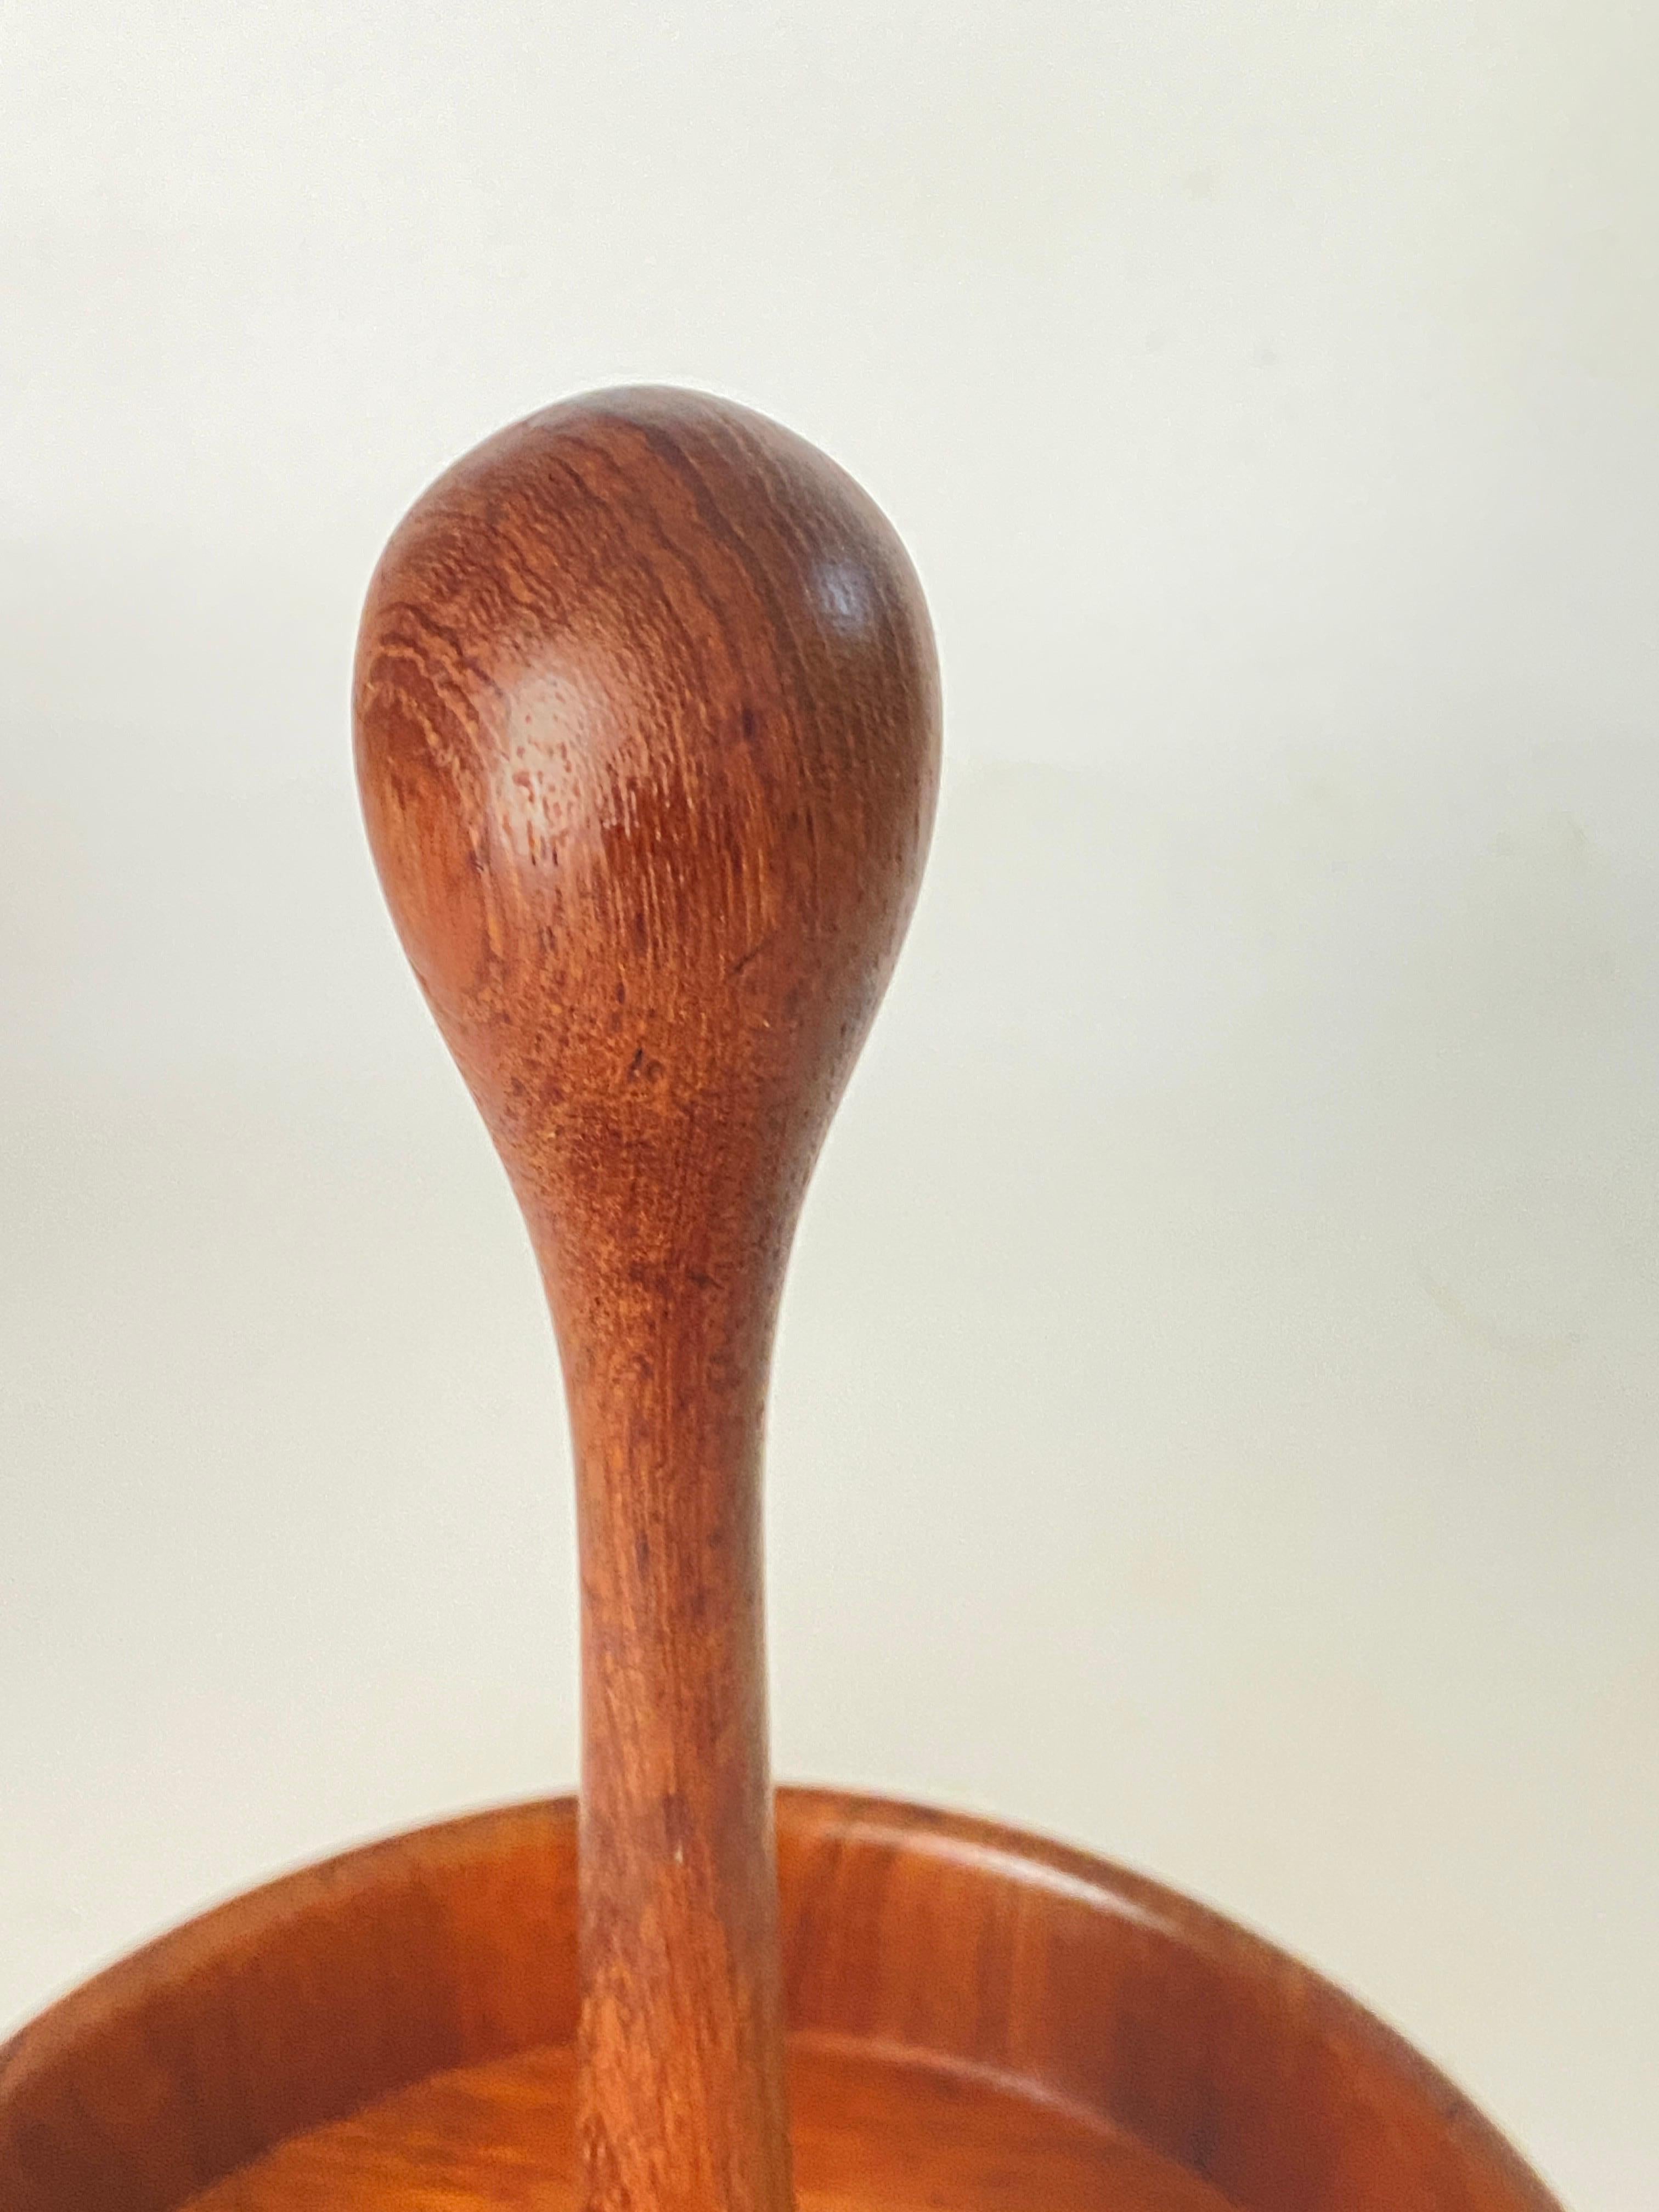 Spice Tray in Wood Denmark 1960s Brown Color with a wooden handle In Good Condition For Sale In Auribeau sur Siagne, FR